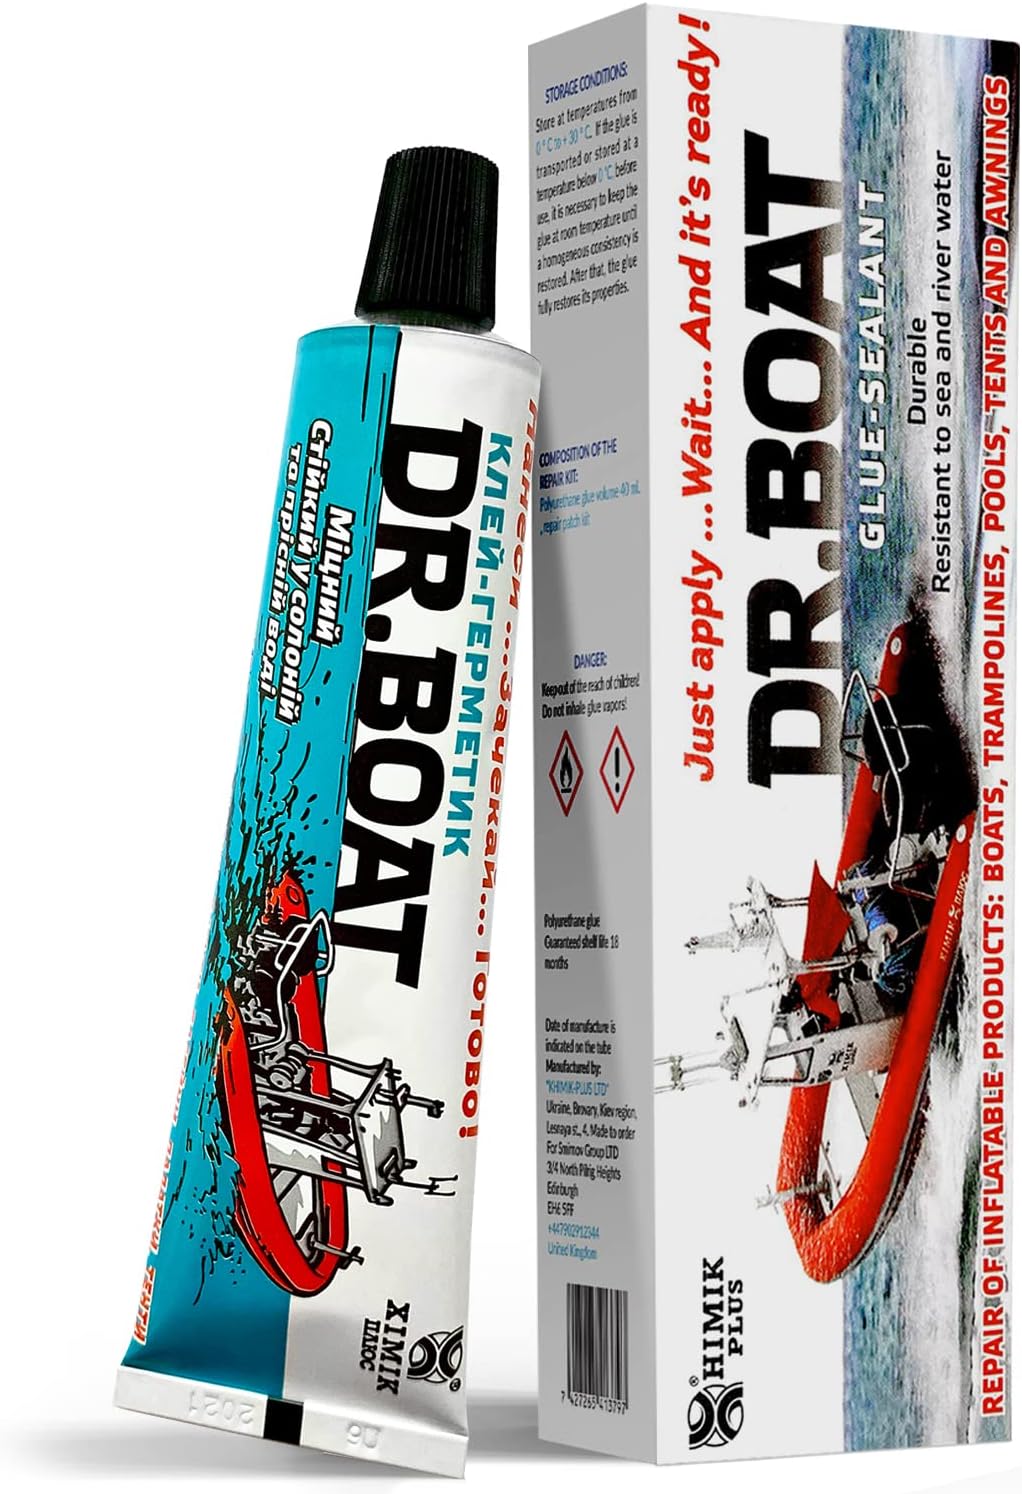 Dr. Boat Glue is easy to use and dries quickly, so you can get your repairs done quickly and easily.